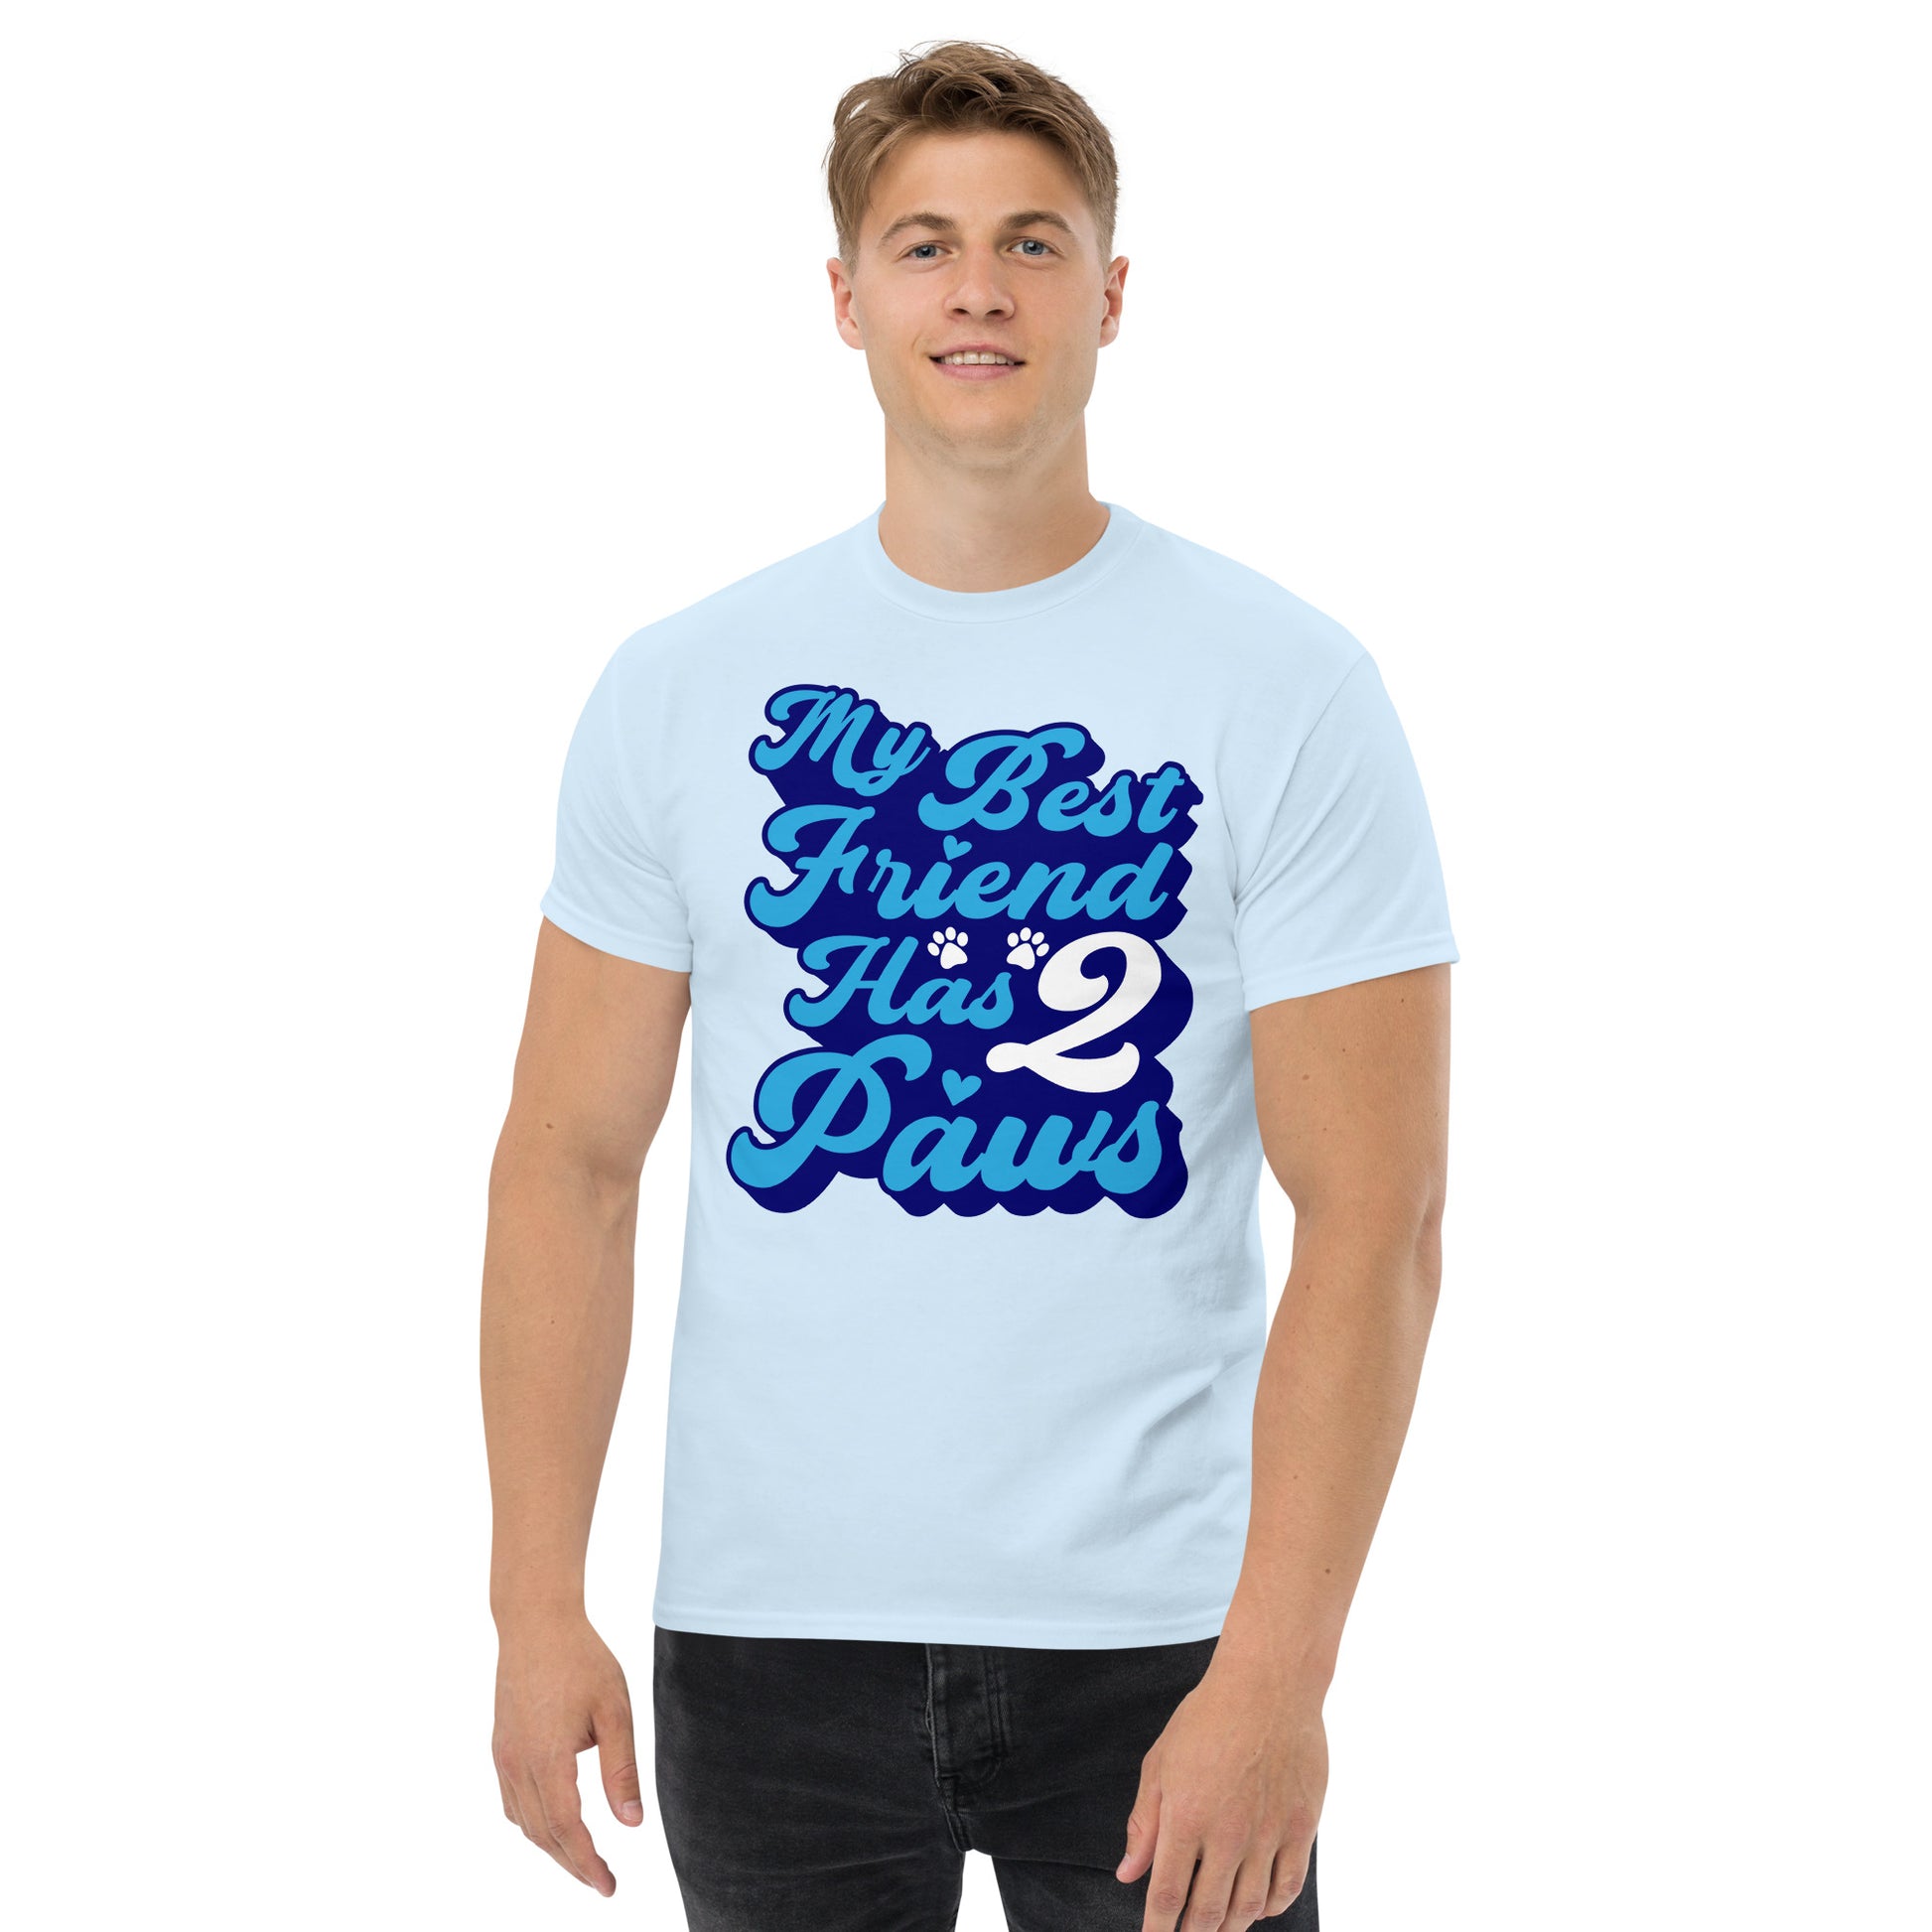 My best friend has 2 Paws men’s t-shirts by Dog Artistry light blue